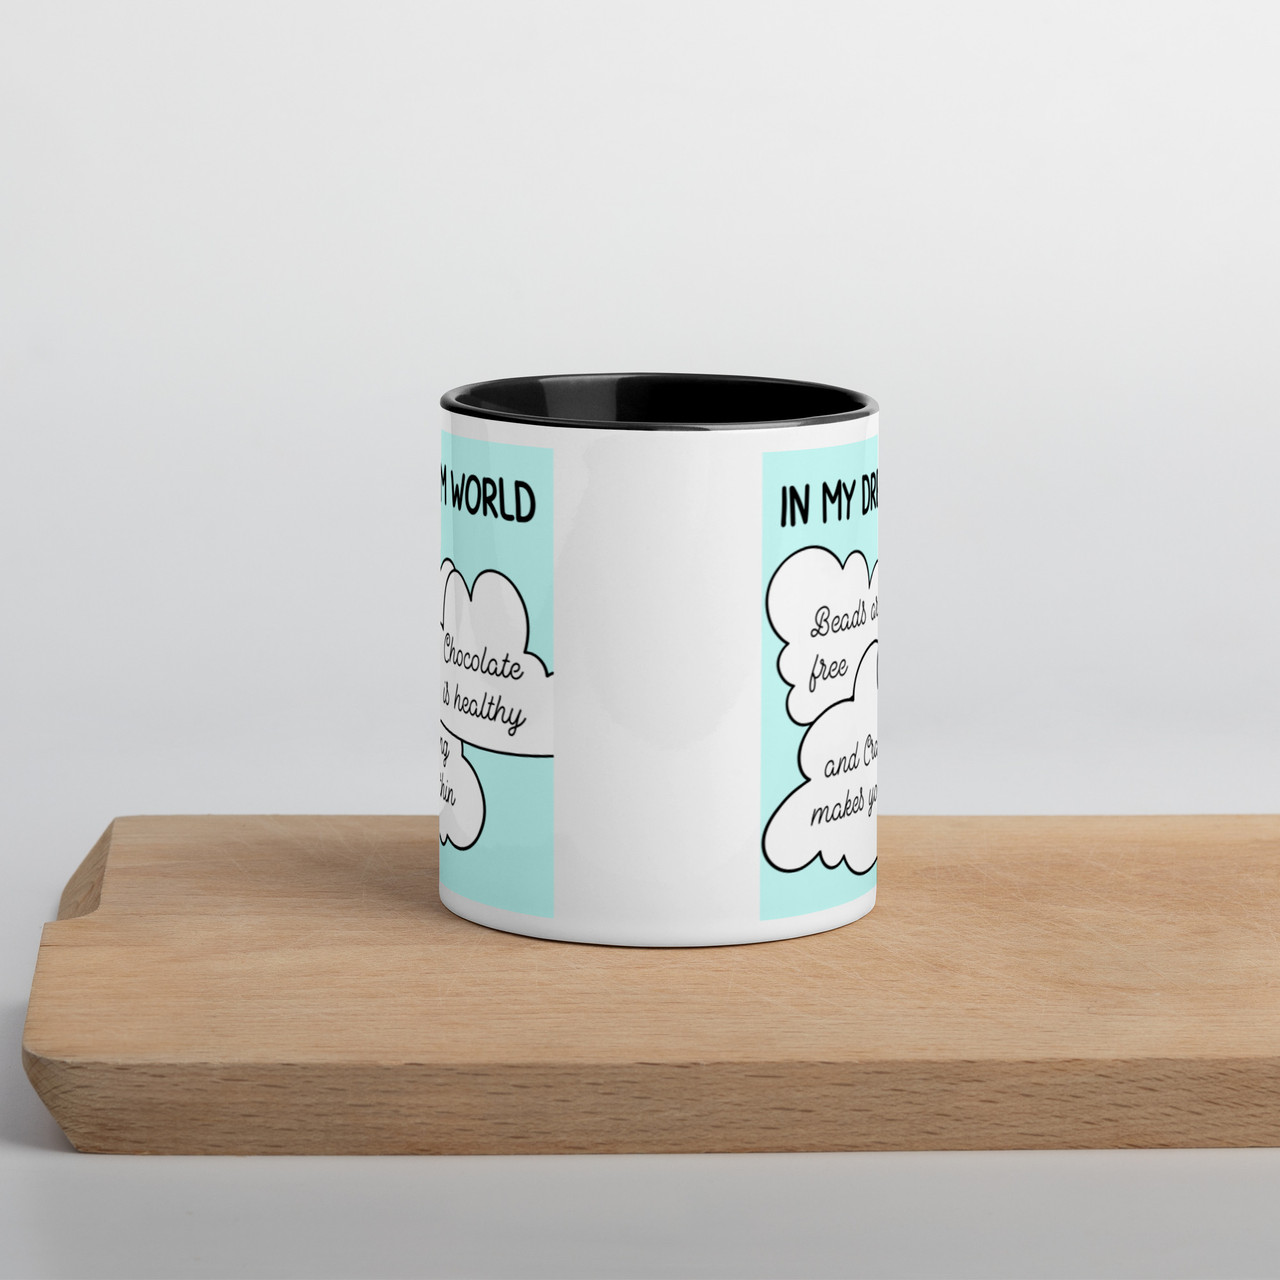 In my dreams - Mug with Colour Inside